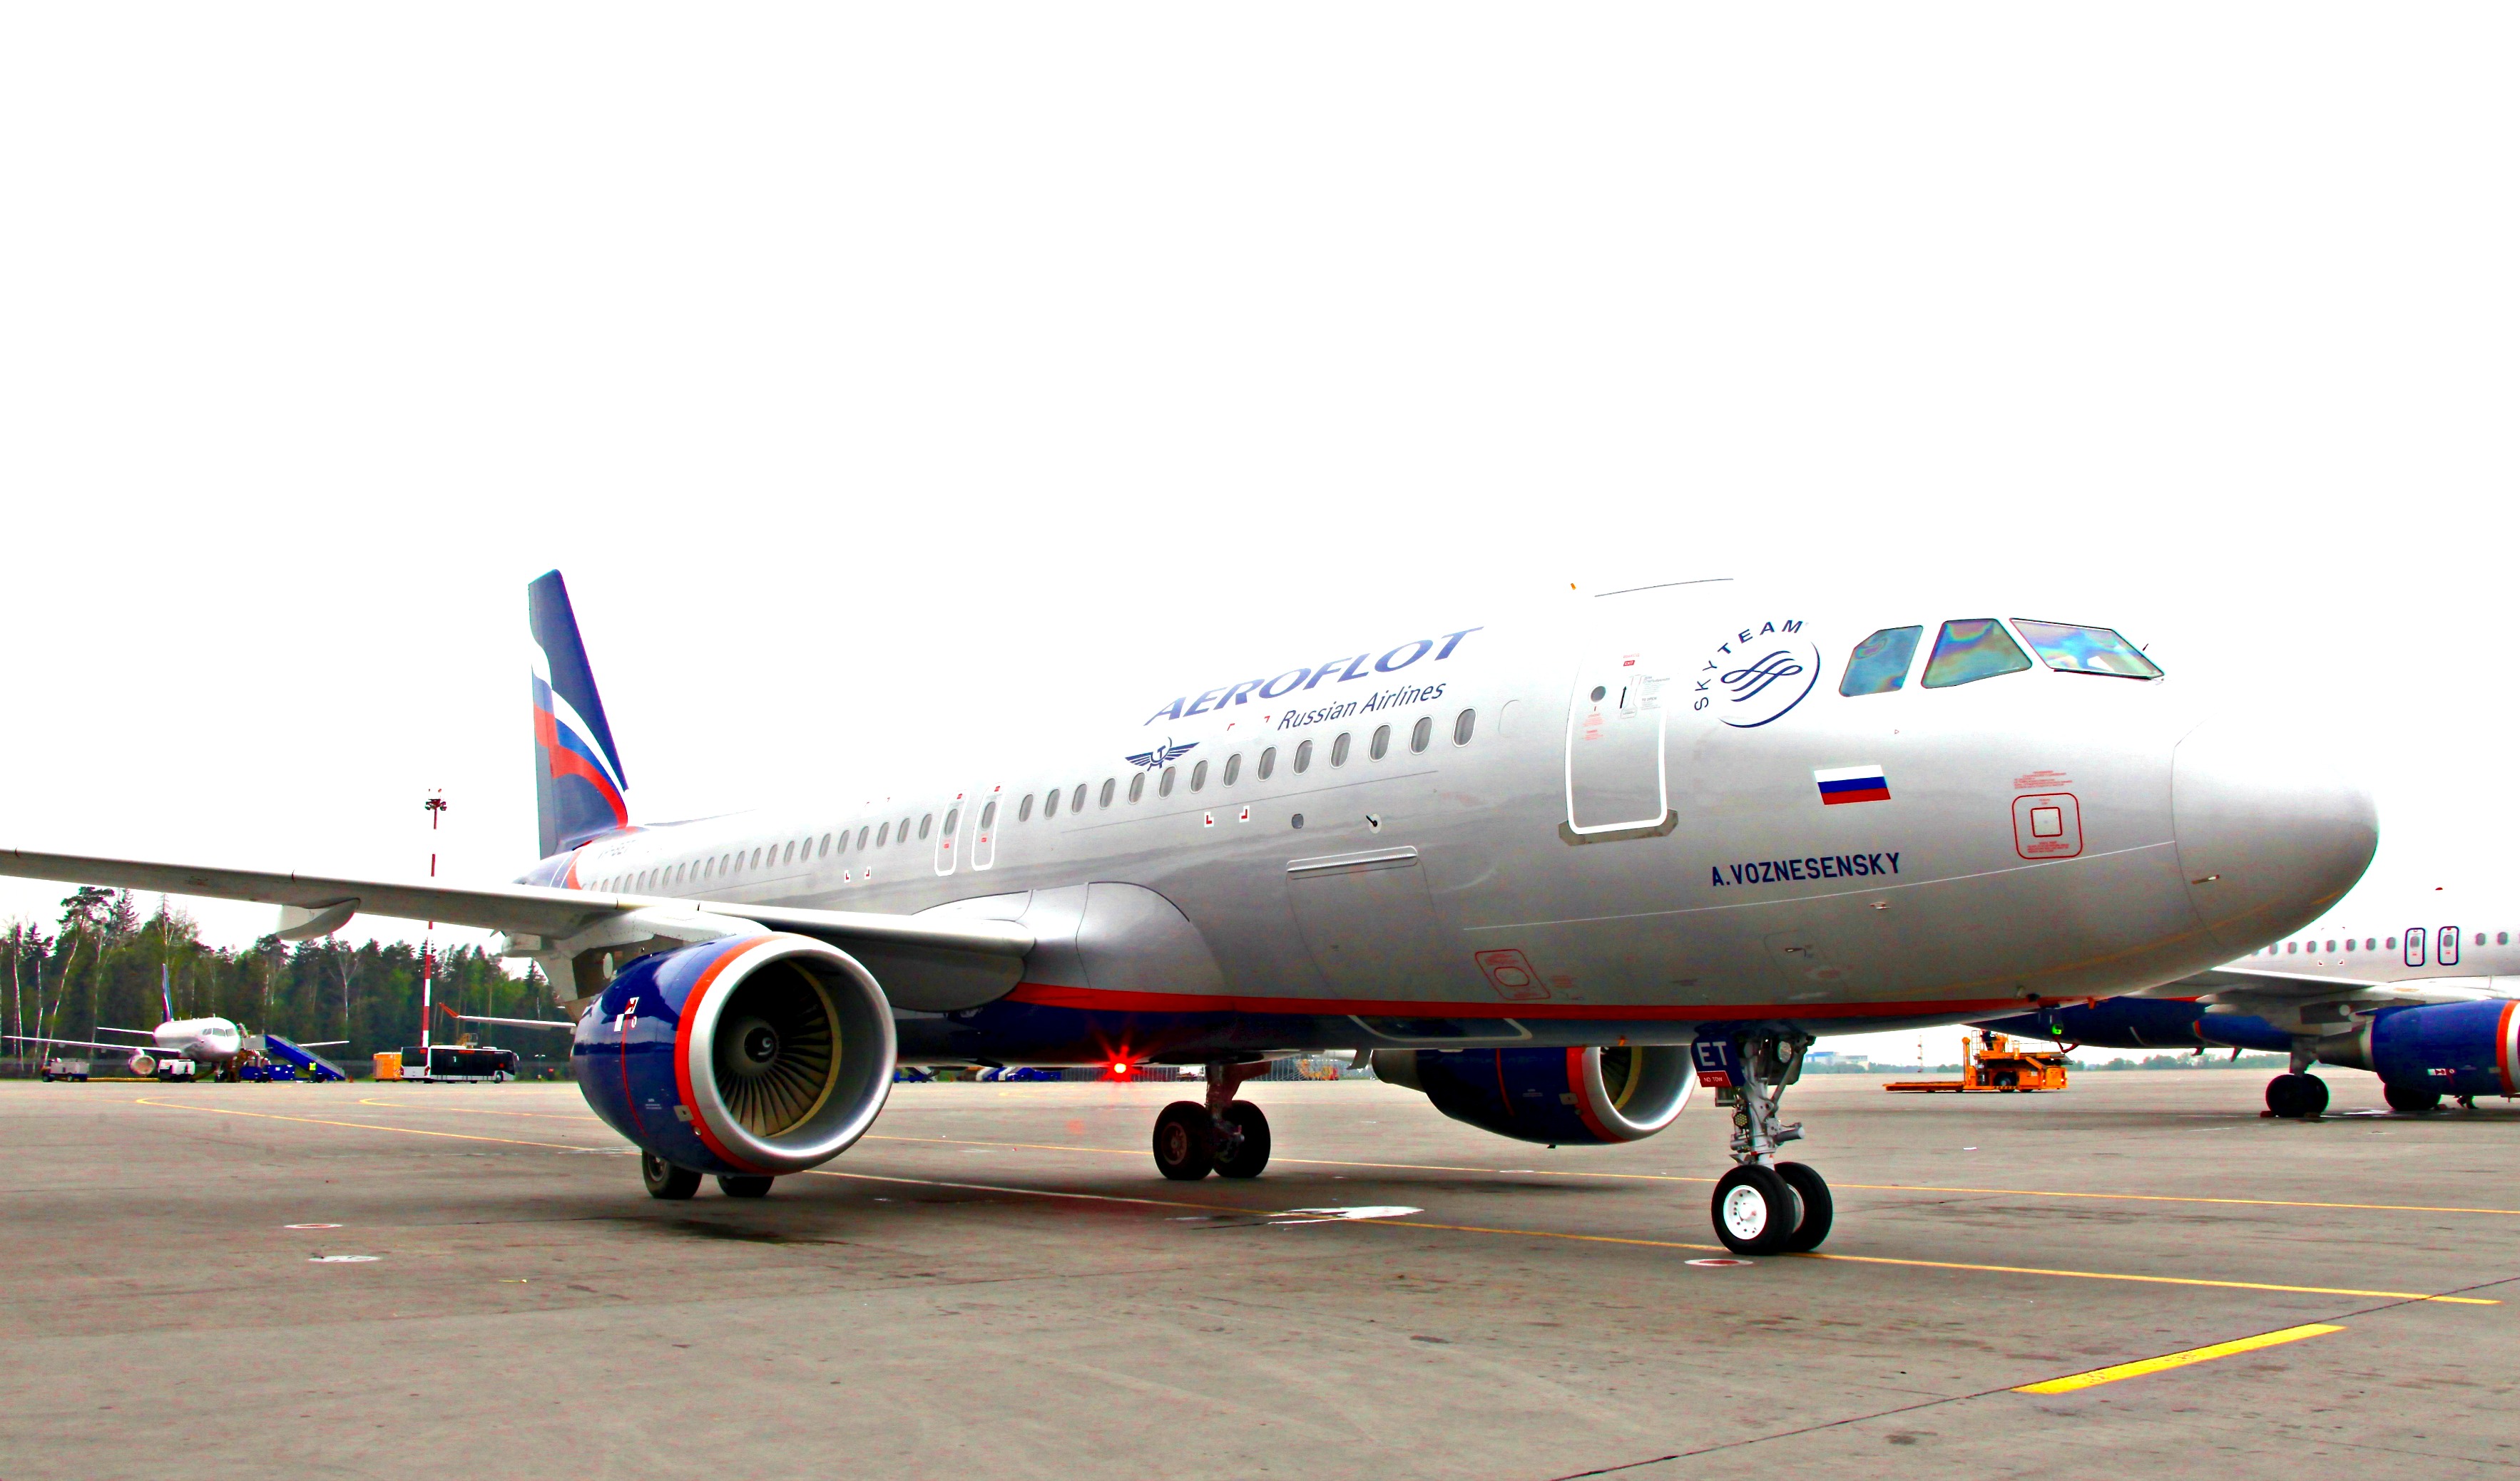 Aeroflot took delivery of two new A320s 